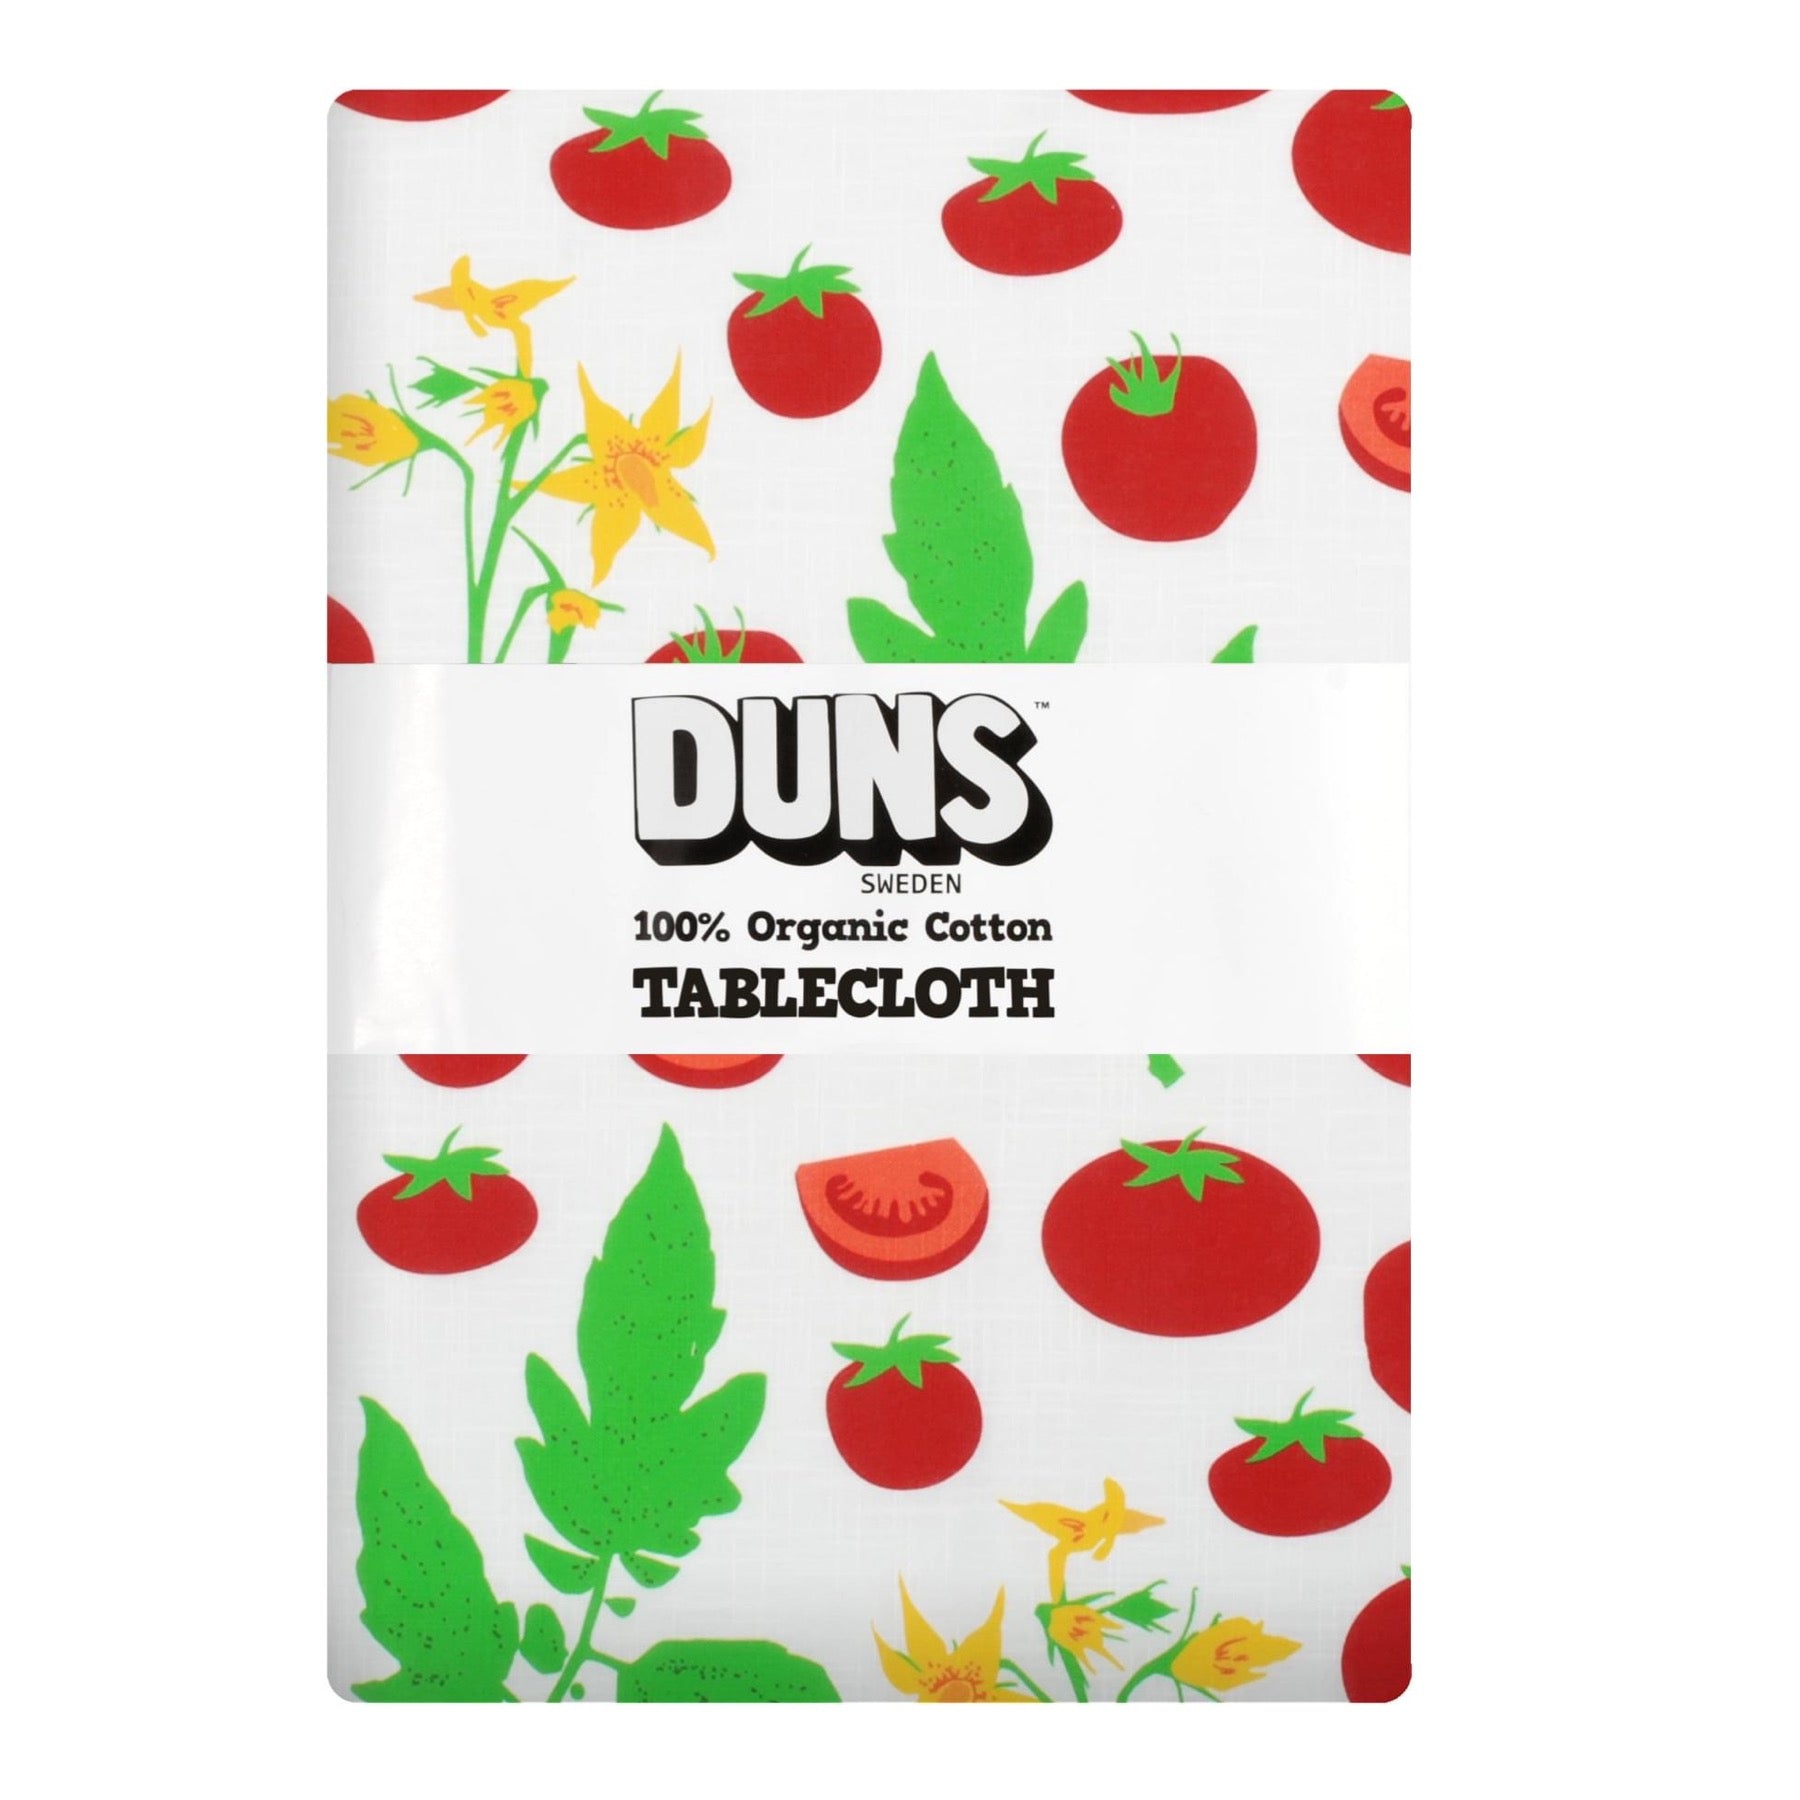 DUNS Sweden Tablecloth Tomatoes